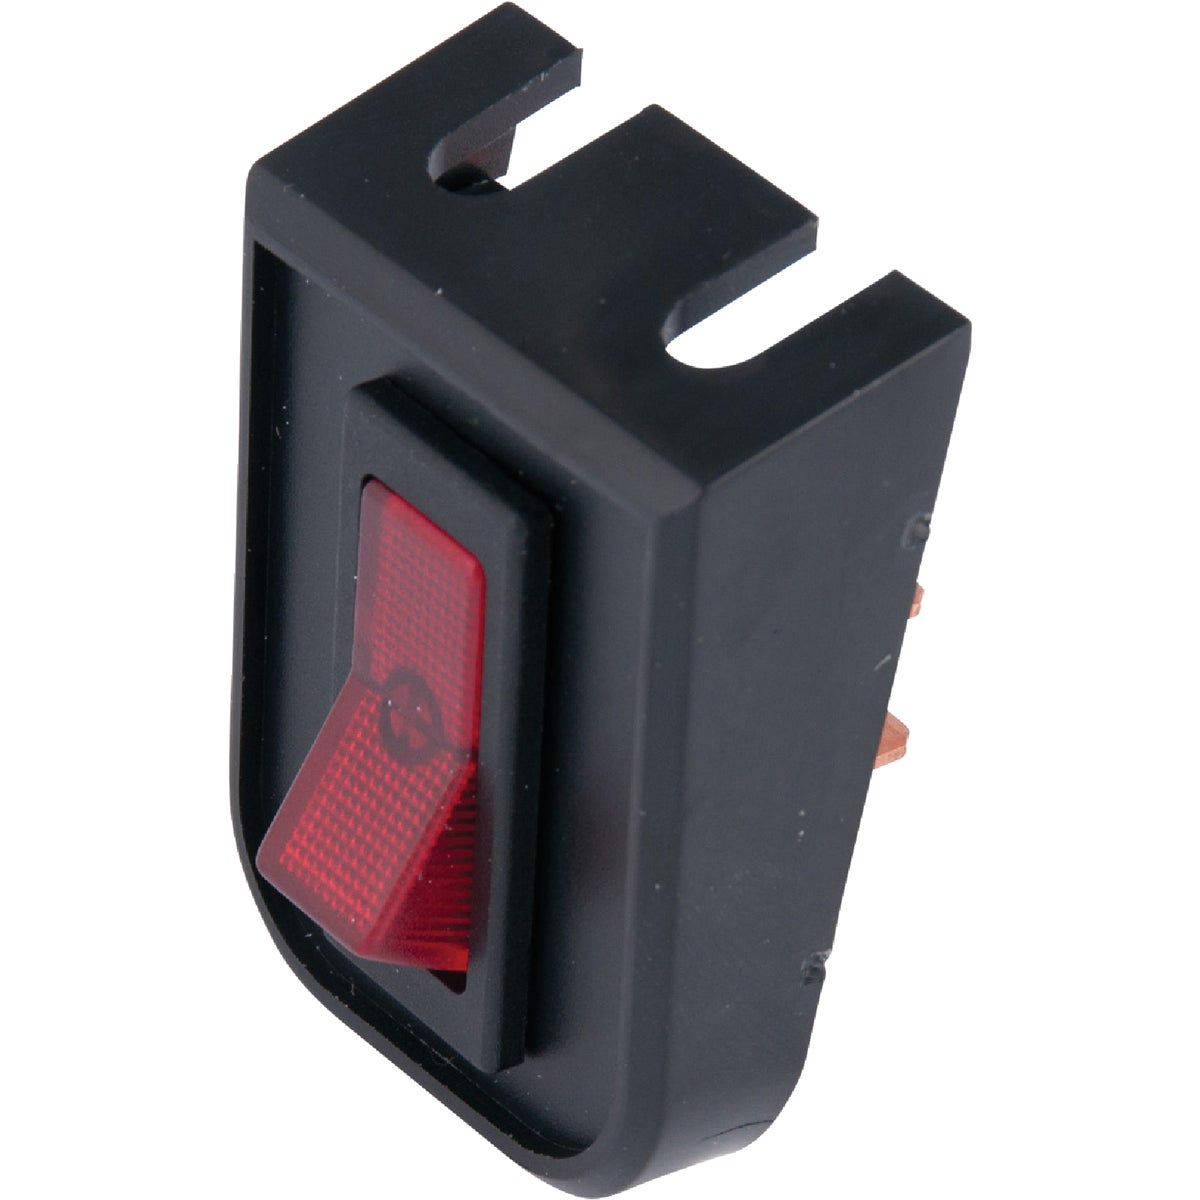 Item 570338, Combines the functions of an indicator and a switch into 1 product.